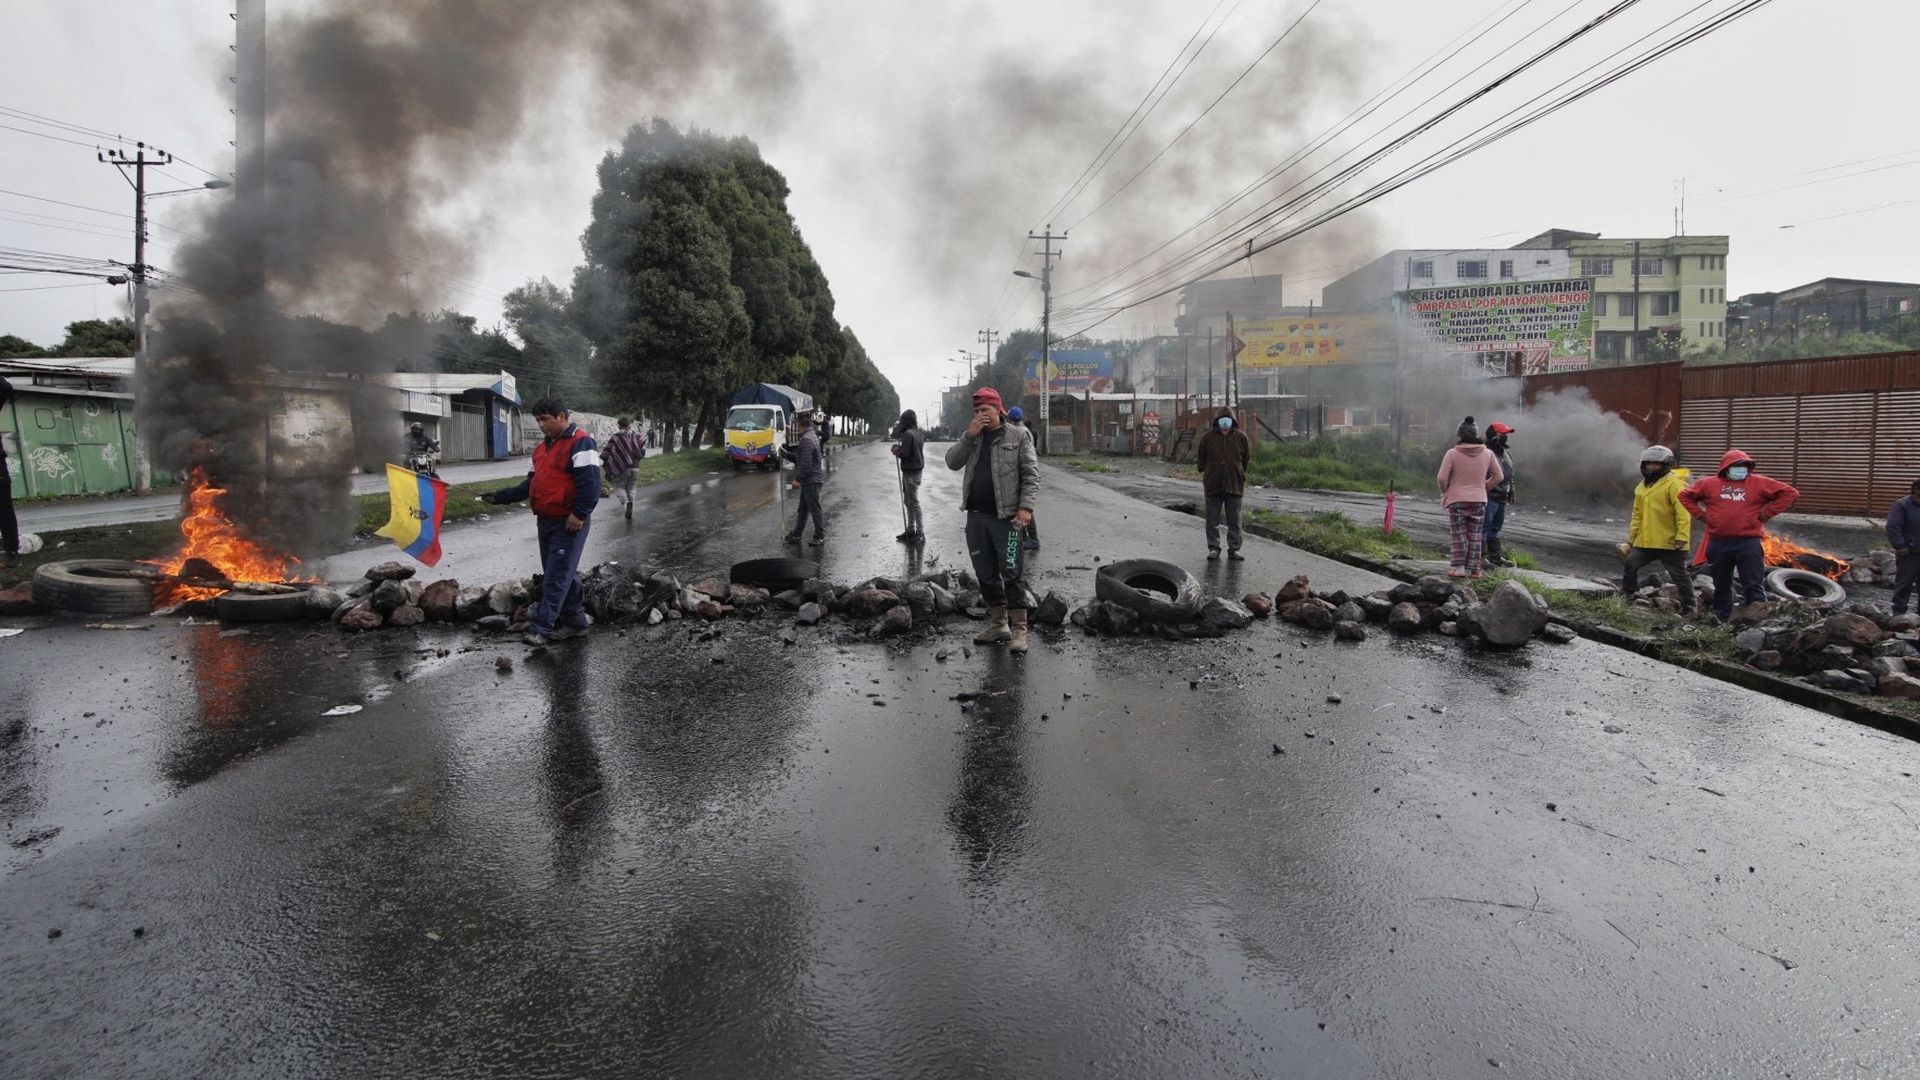 Protesters carry out road blockades in Quito early June 20. Photo: Cristina Vega Rhor/AFP via Getty Images